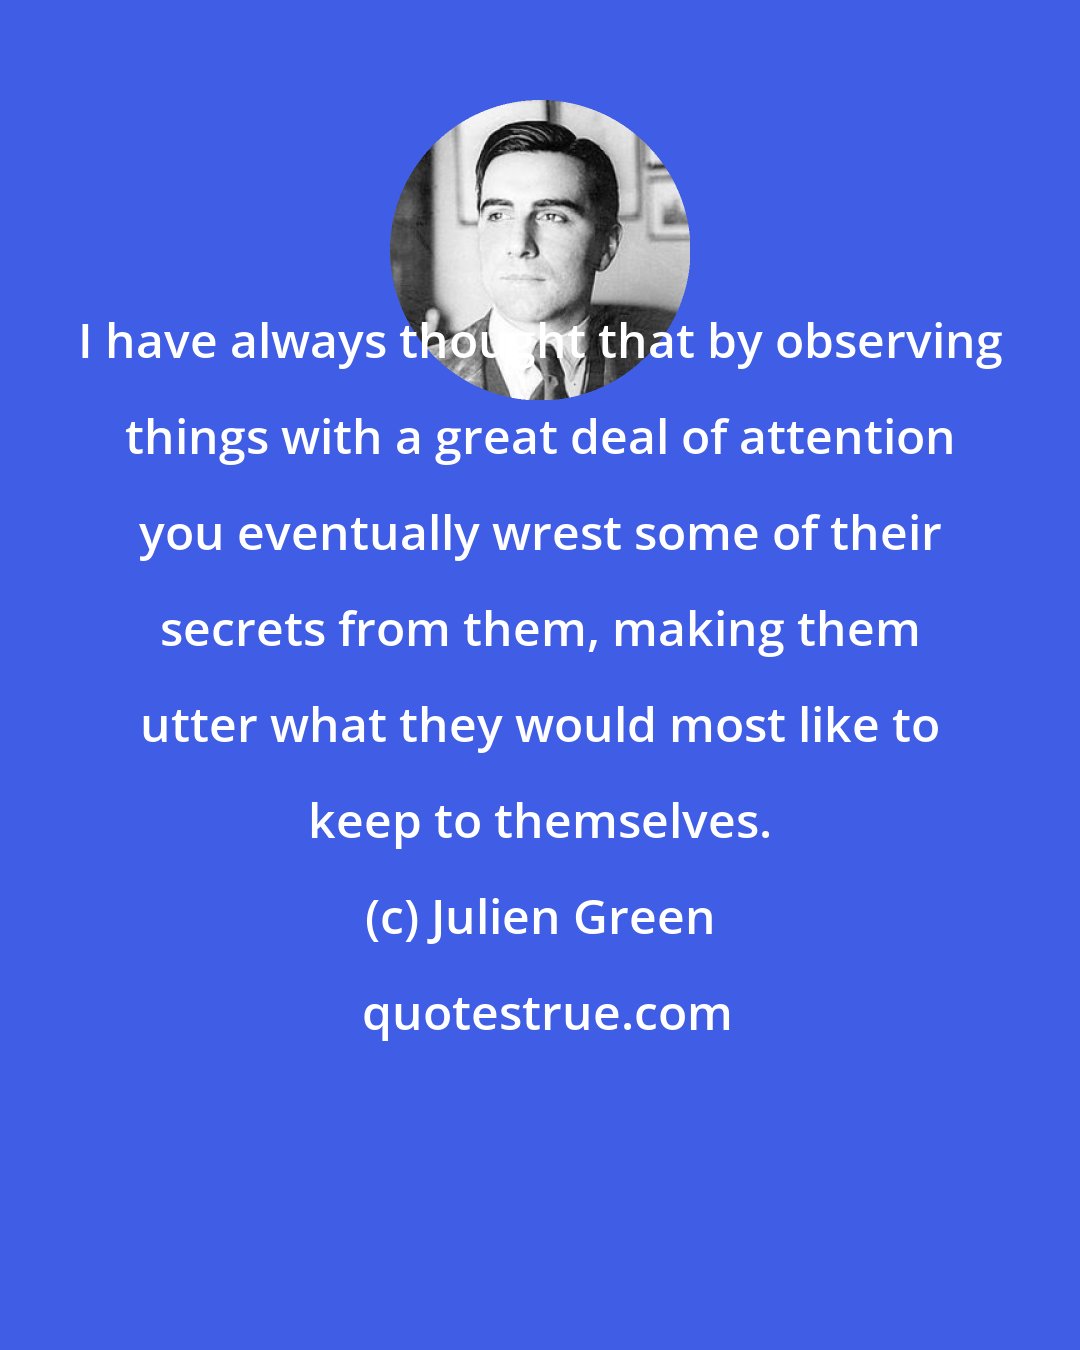 Julien Green: I have always thought that by observing things with a great deal of attention you eventually wrest some of their secrets from them, making them utter what they would most like to keep to themselves.